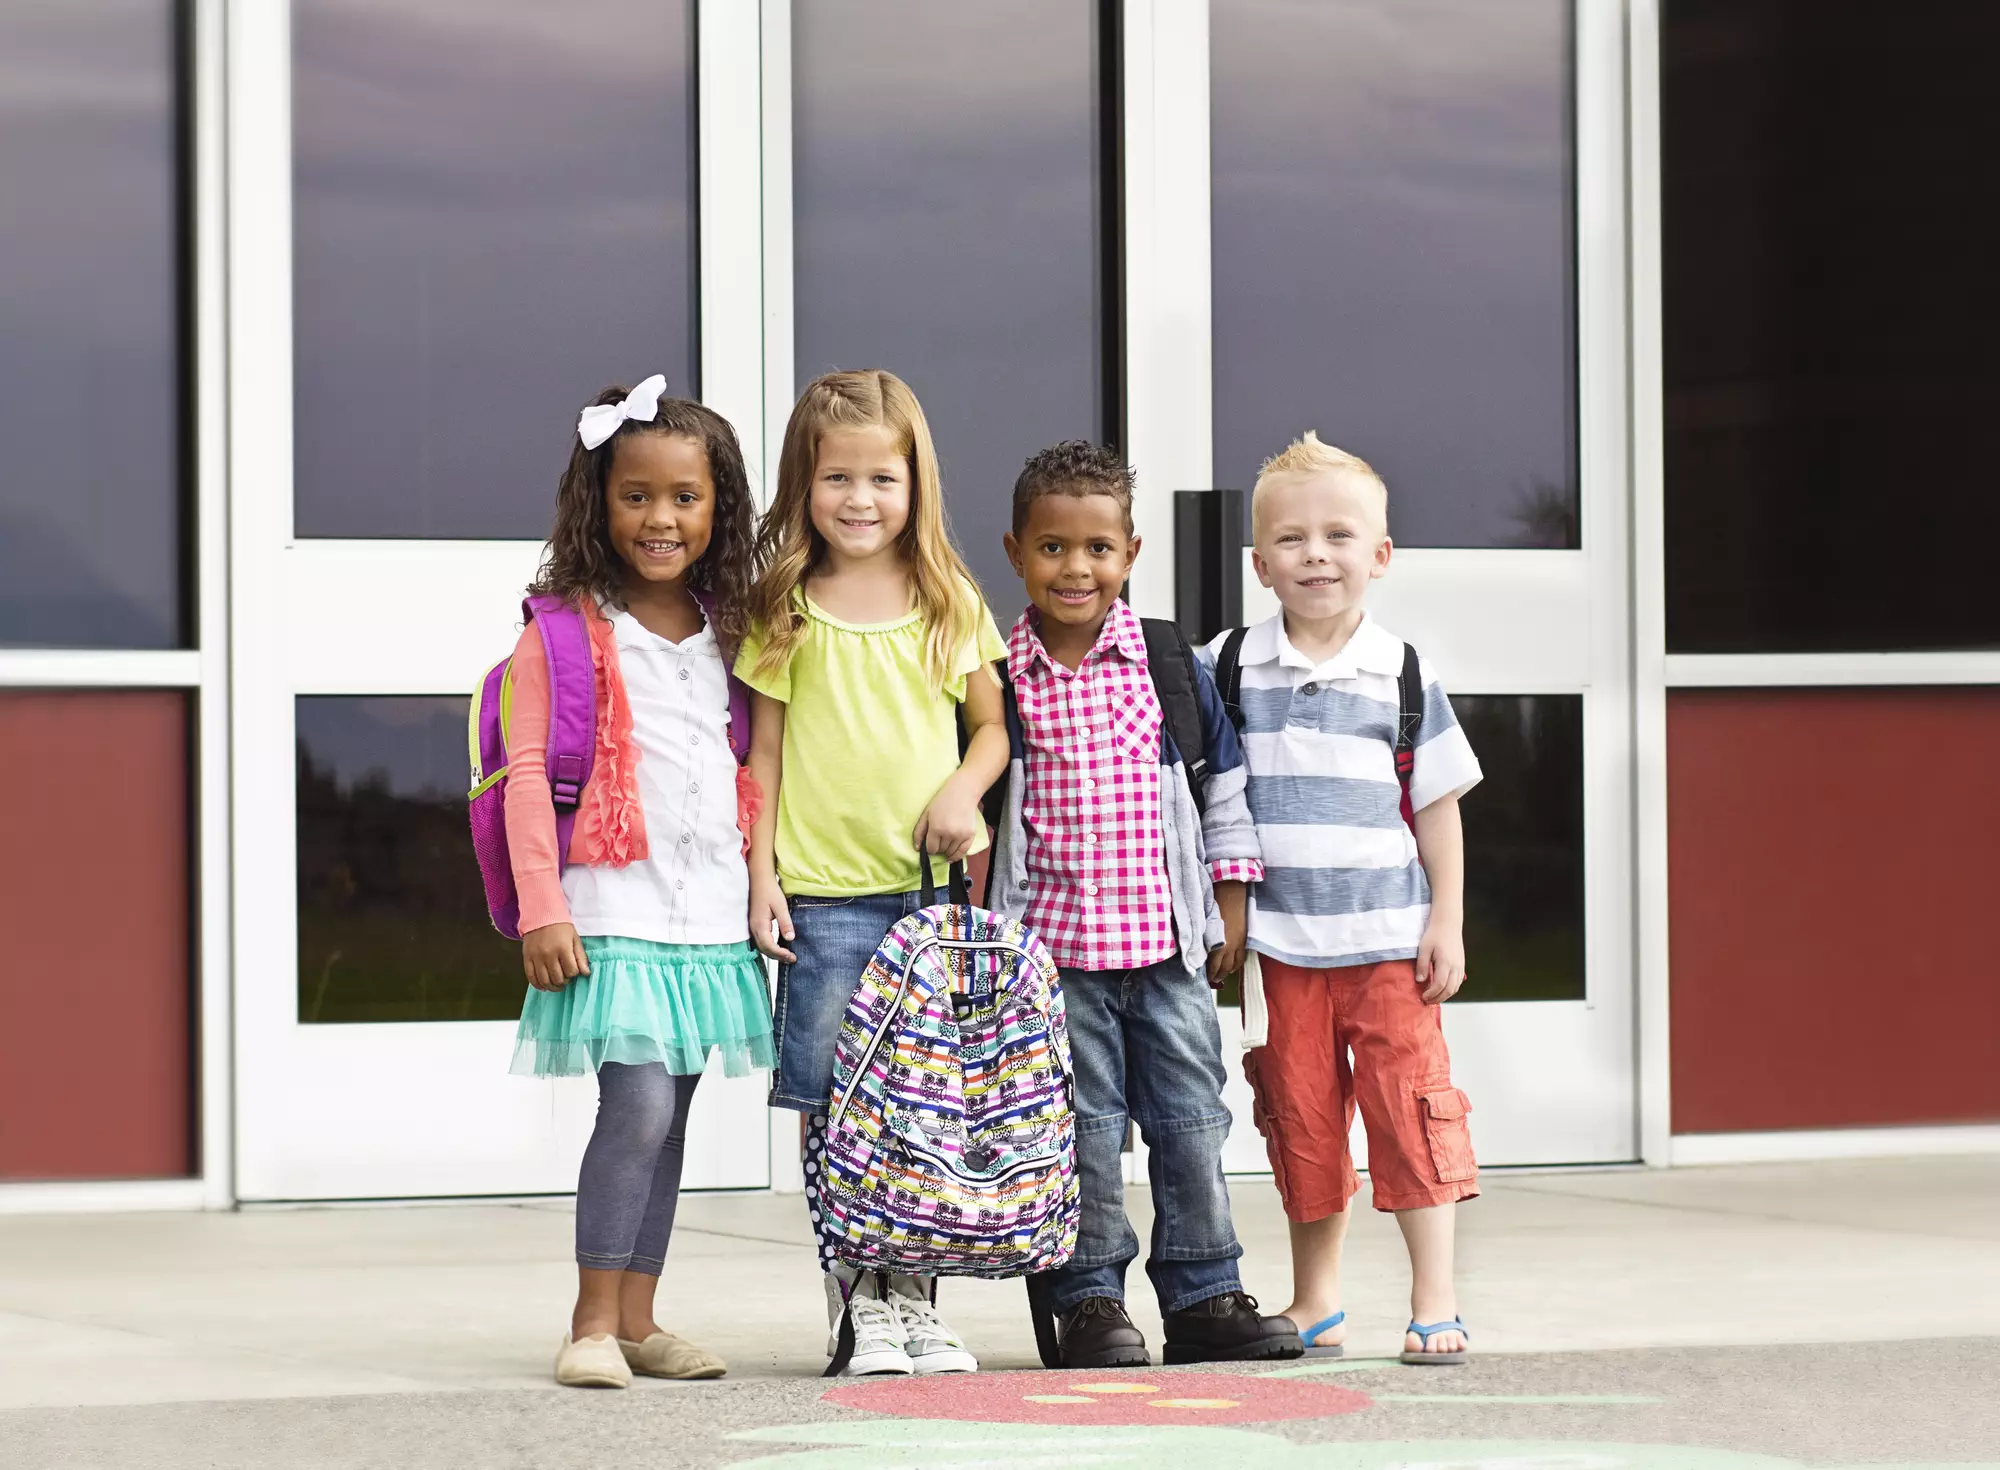 back-to-school preparation tips for first day success - group of kids smiling outside school door